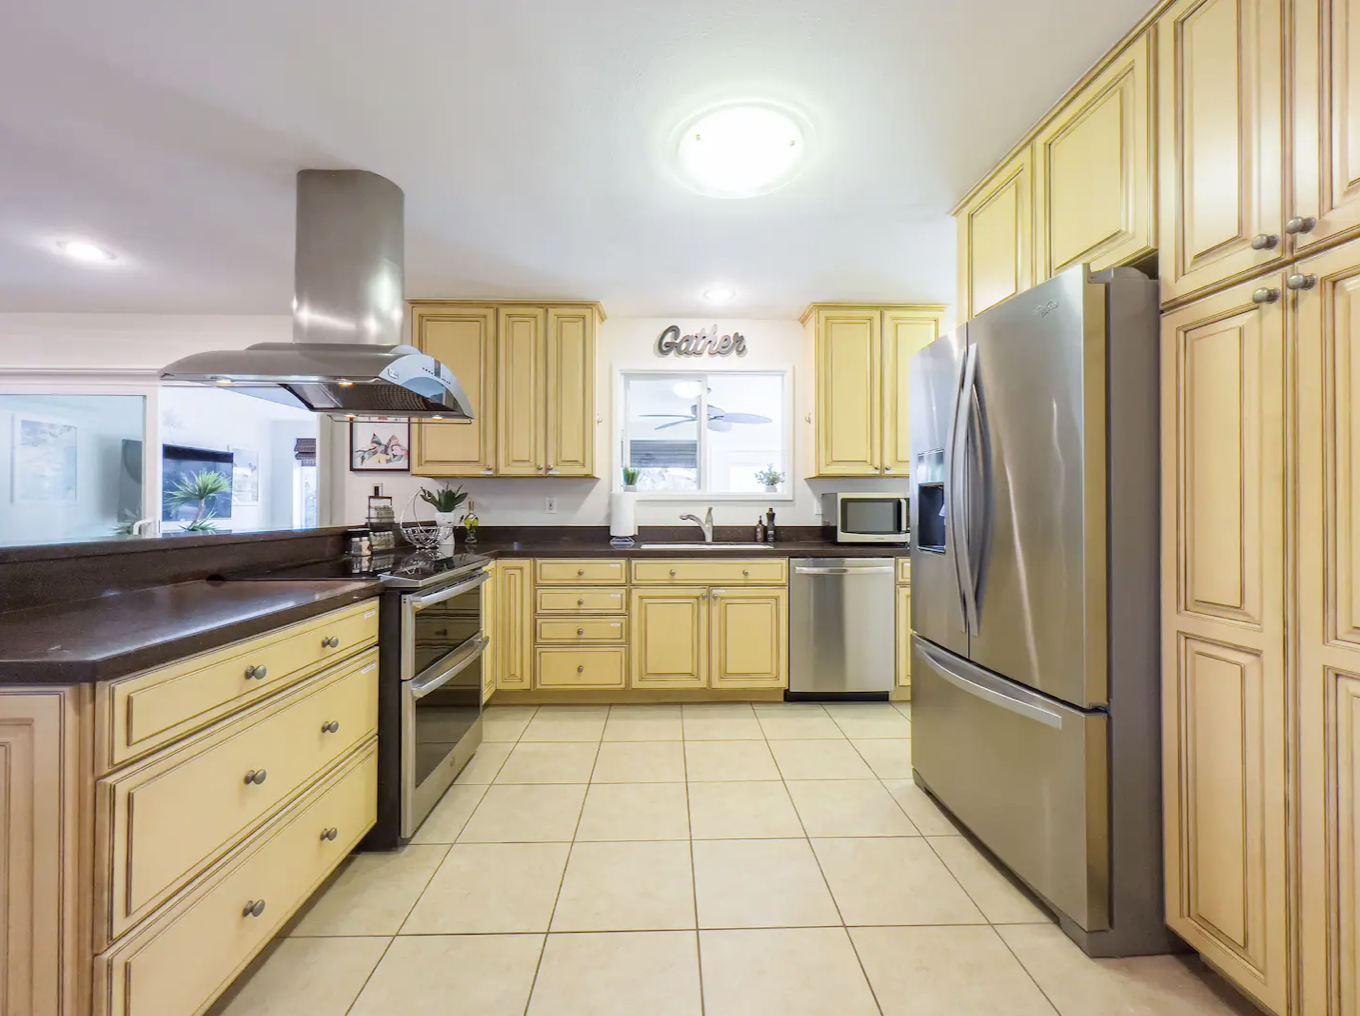 The kitchen has modern appliances including: dishwasher, fridge, blender, stove top, drip coffee maker, pots and pans, utensils.